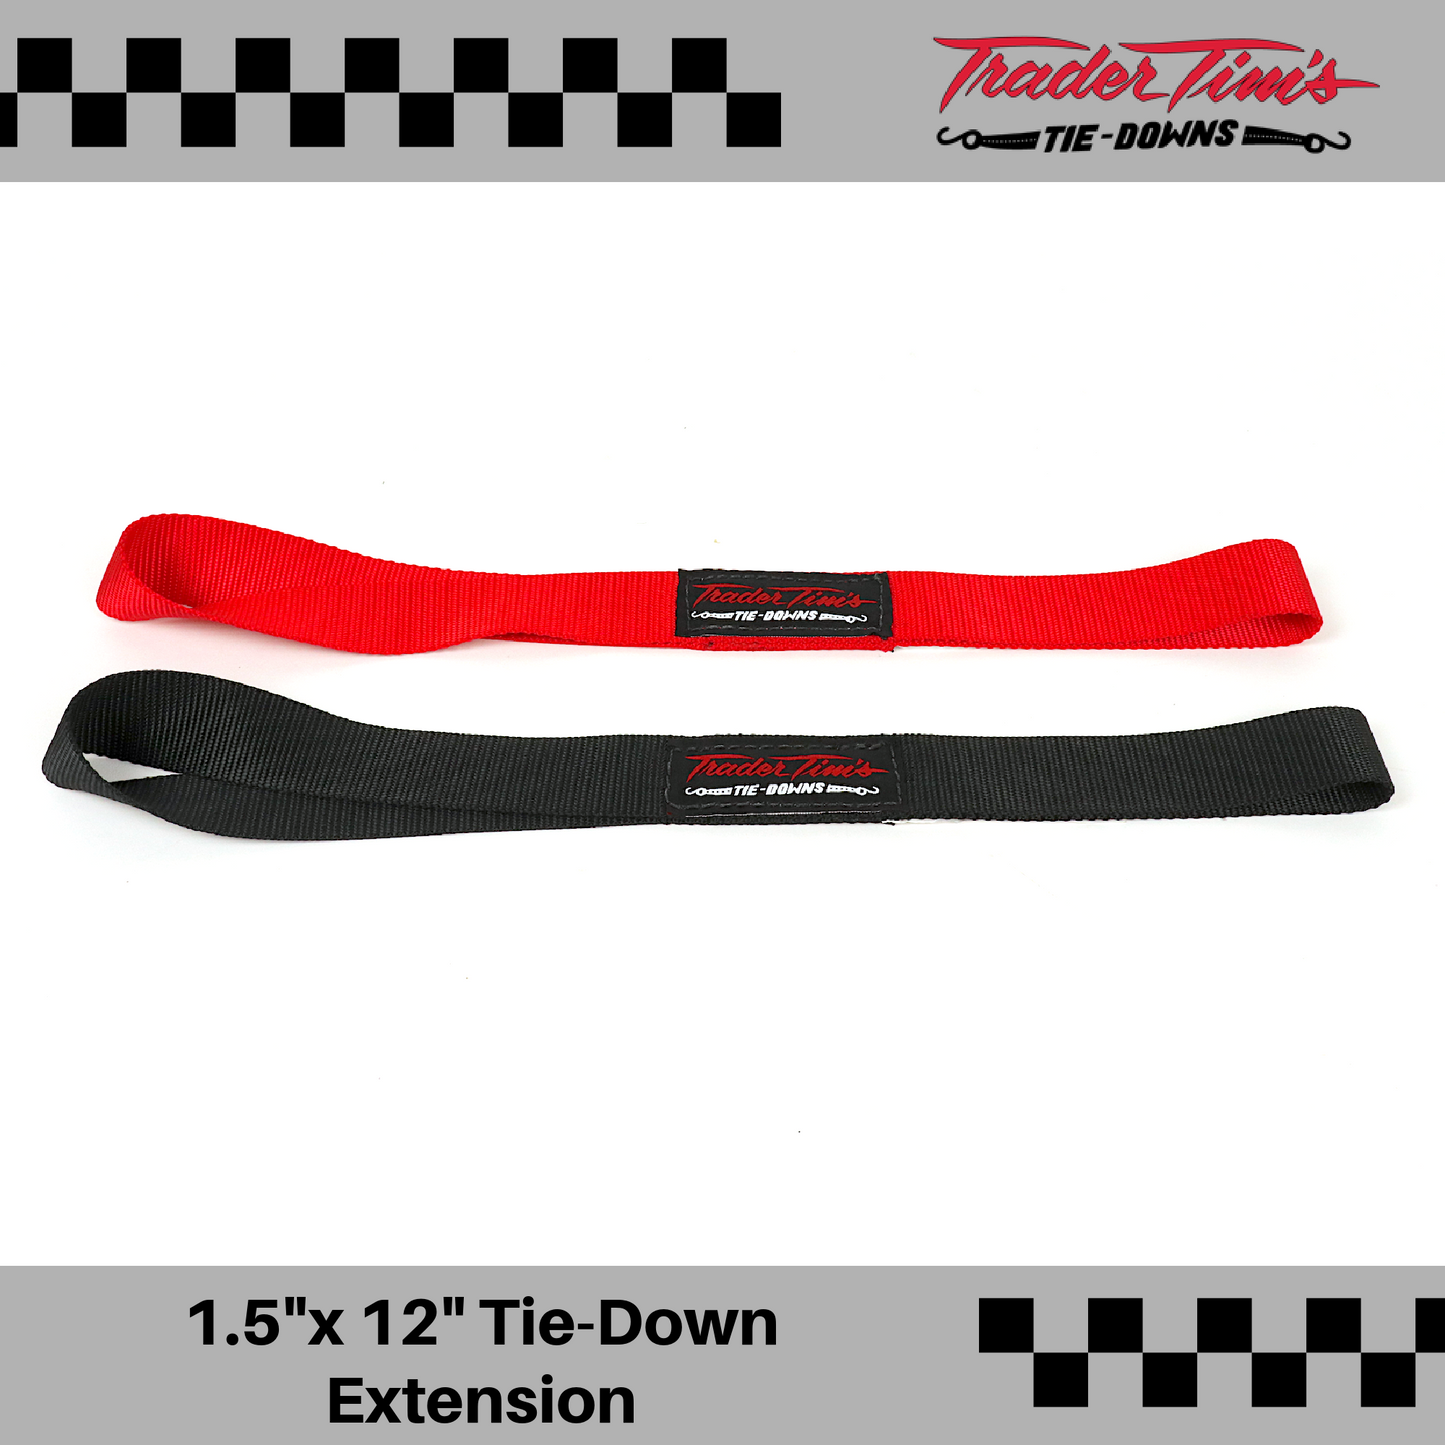 1.5" x 12" Soft Tie-Down Extension - Red or Black